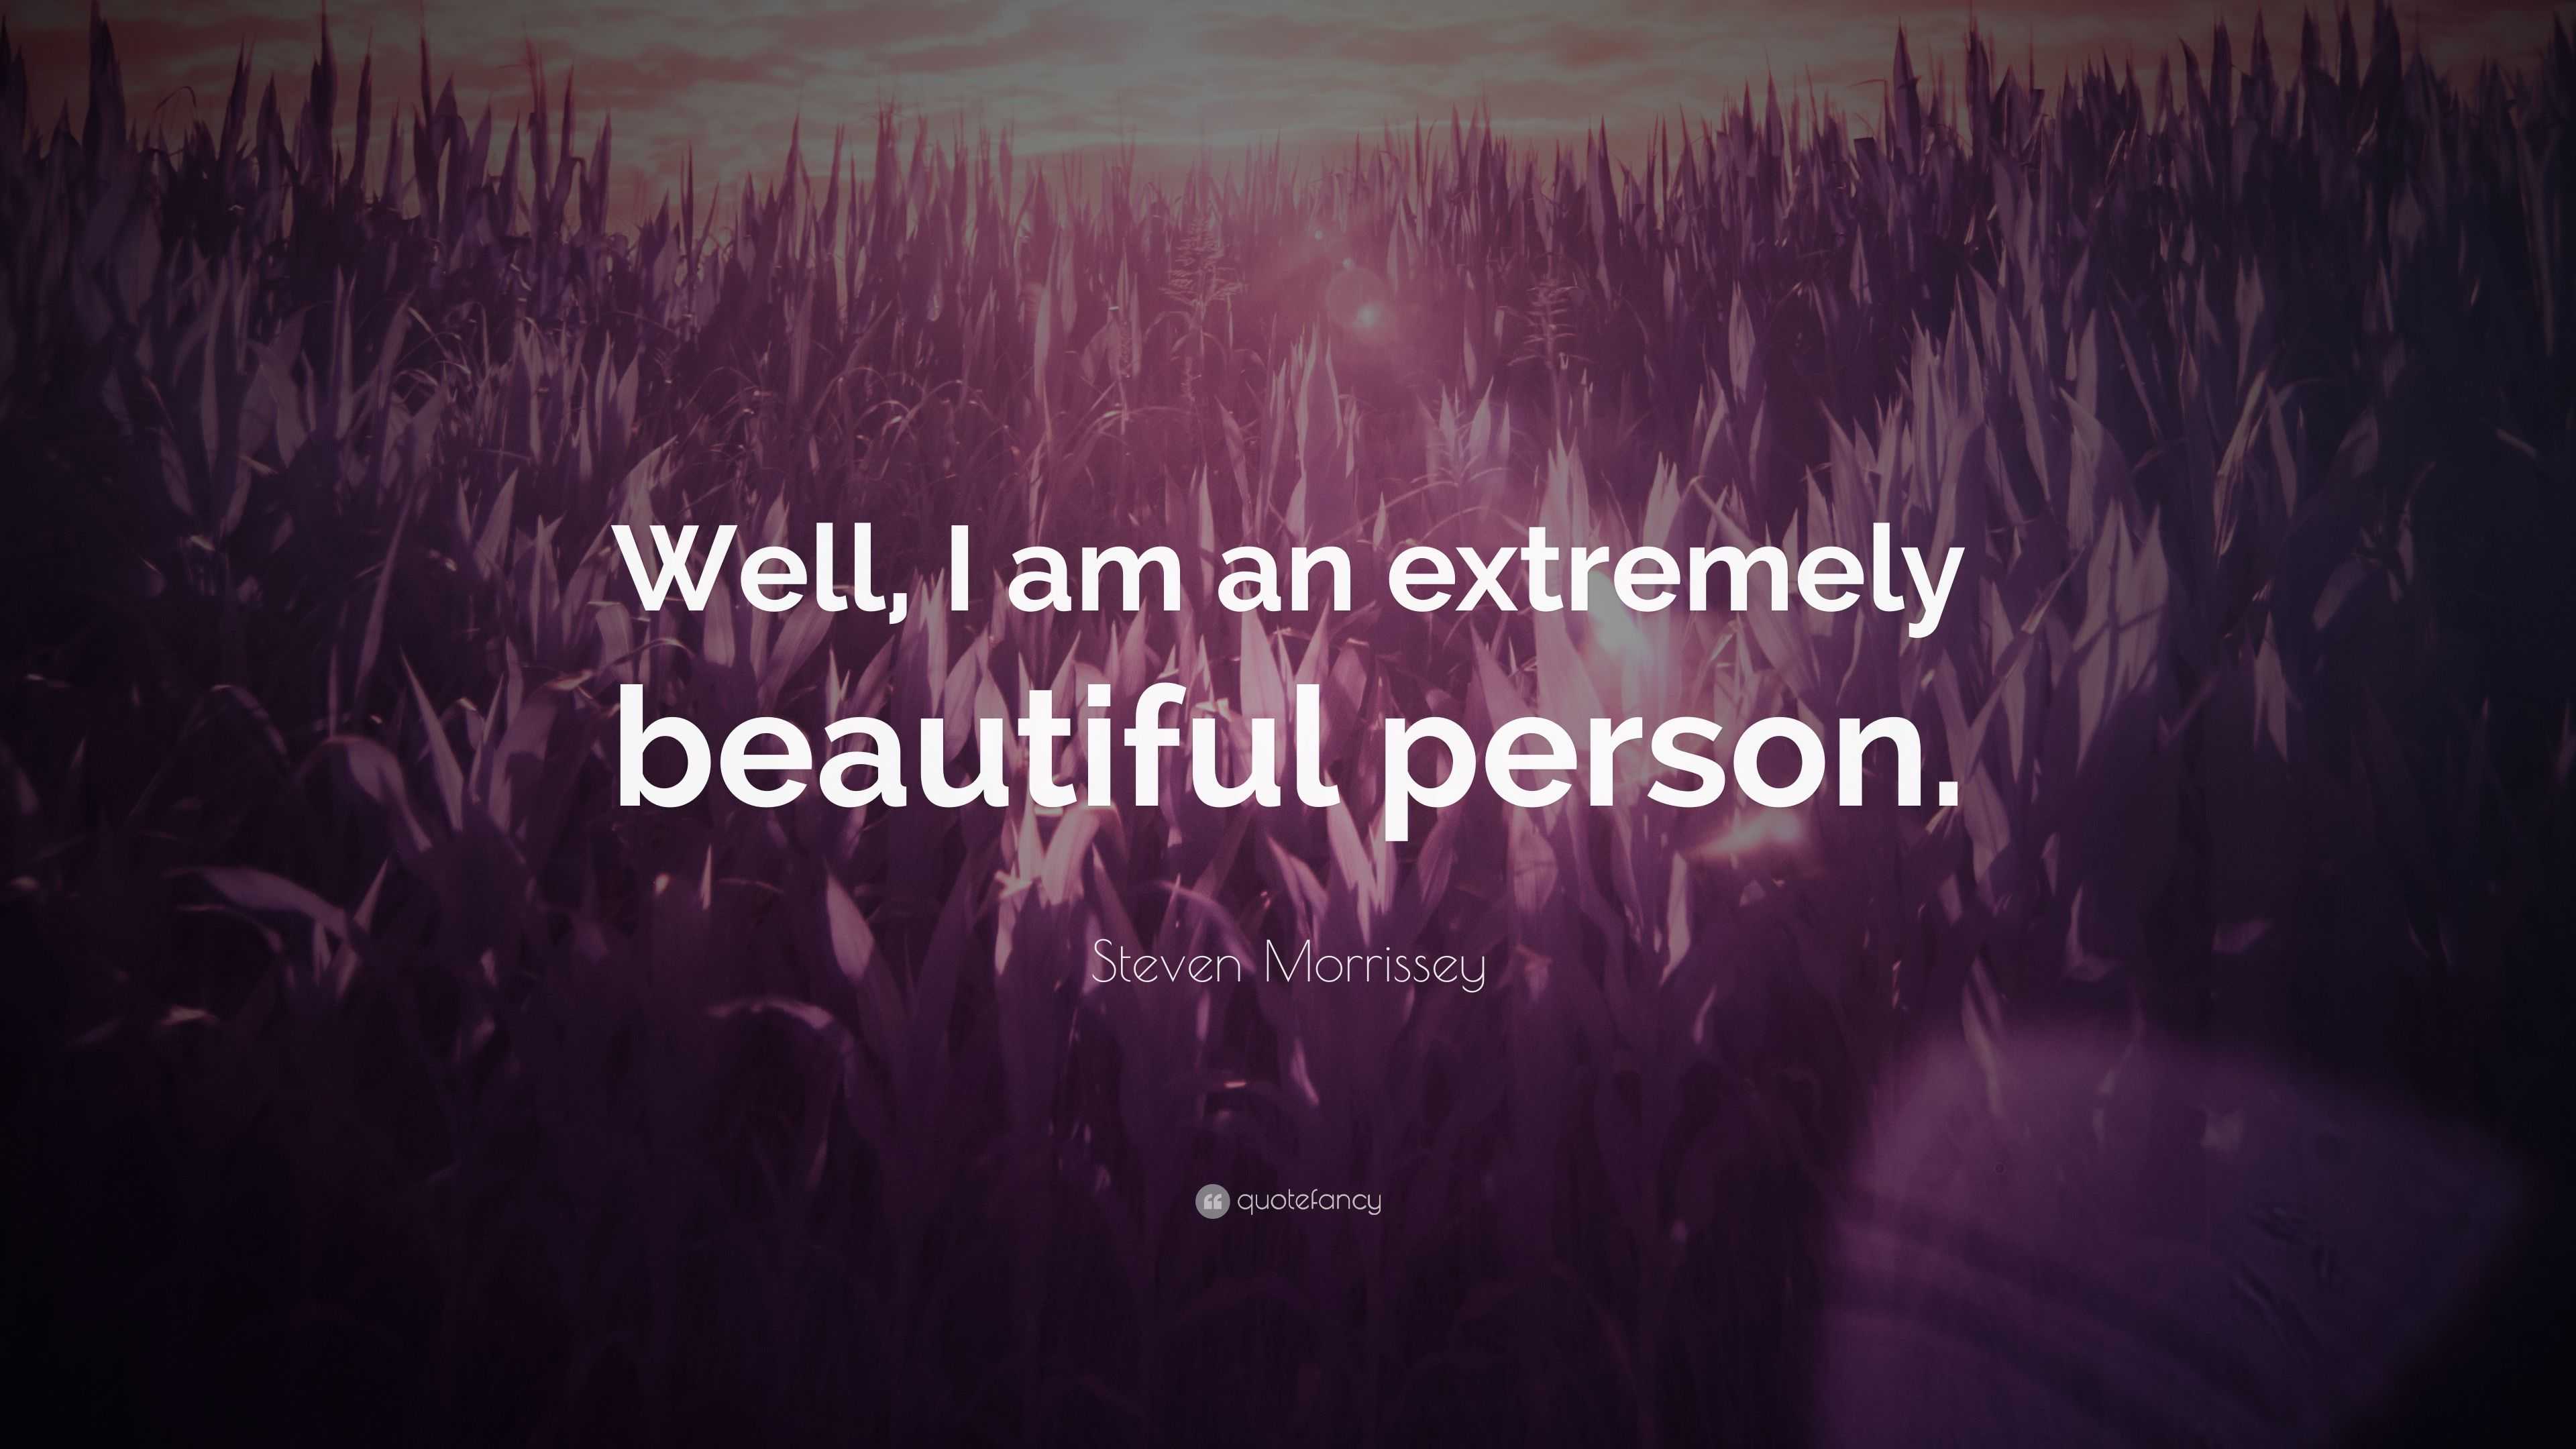 Steven Morrissey Quote: “Well, I am an extremely beautiful person.”